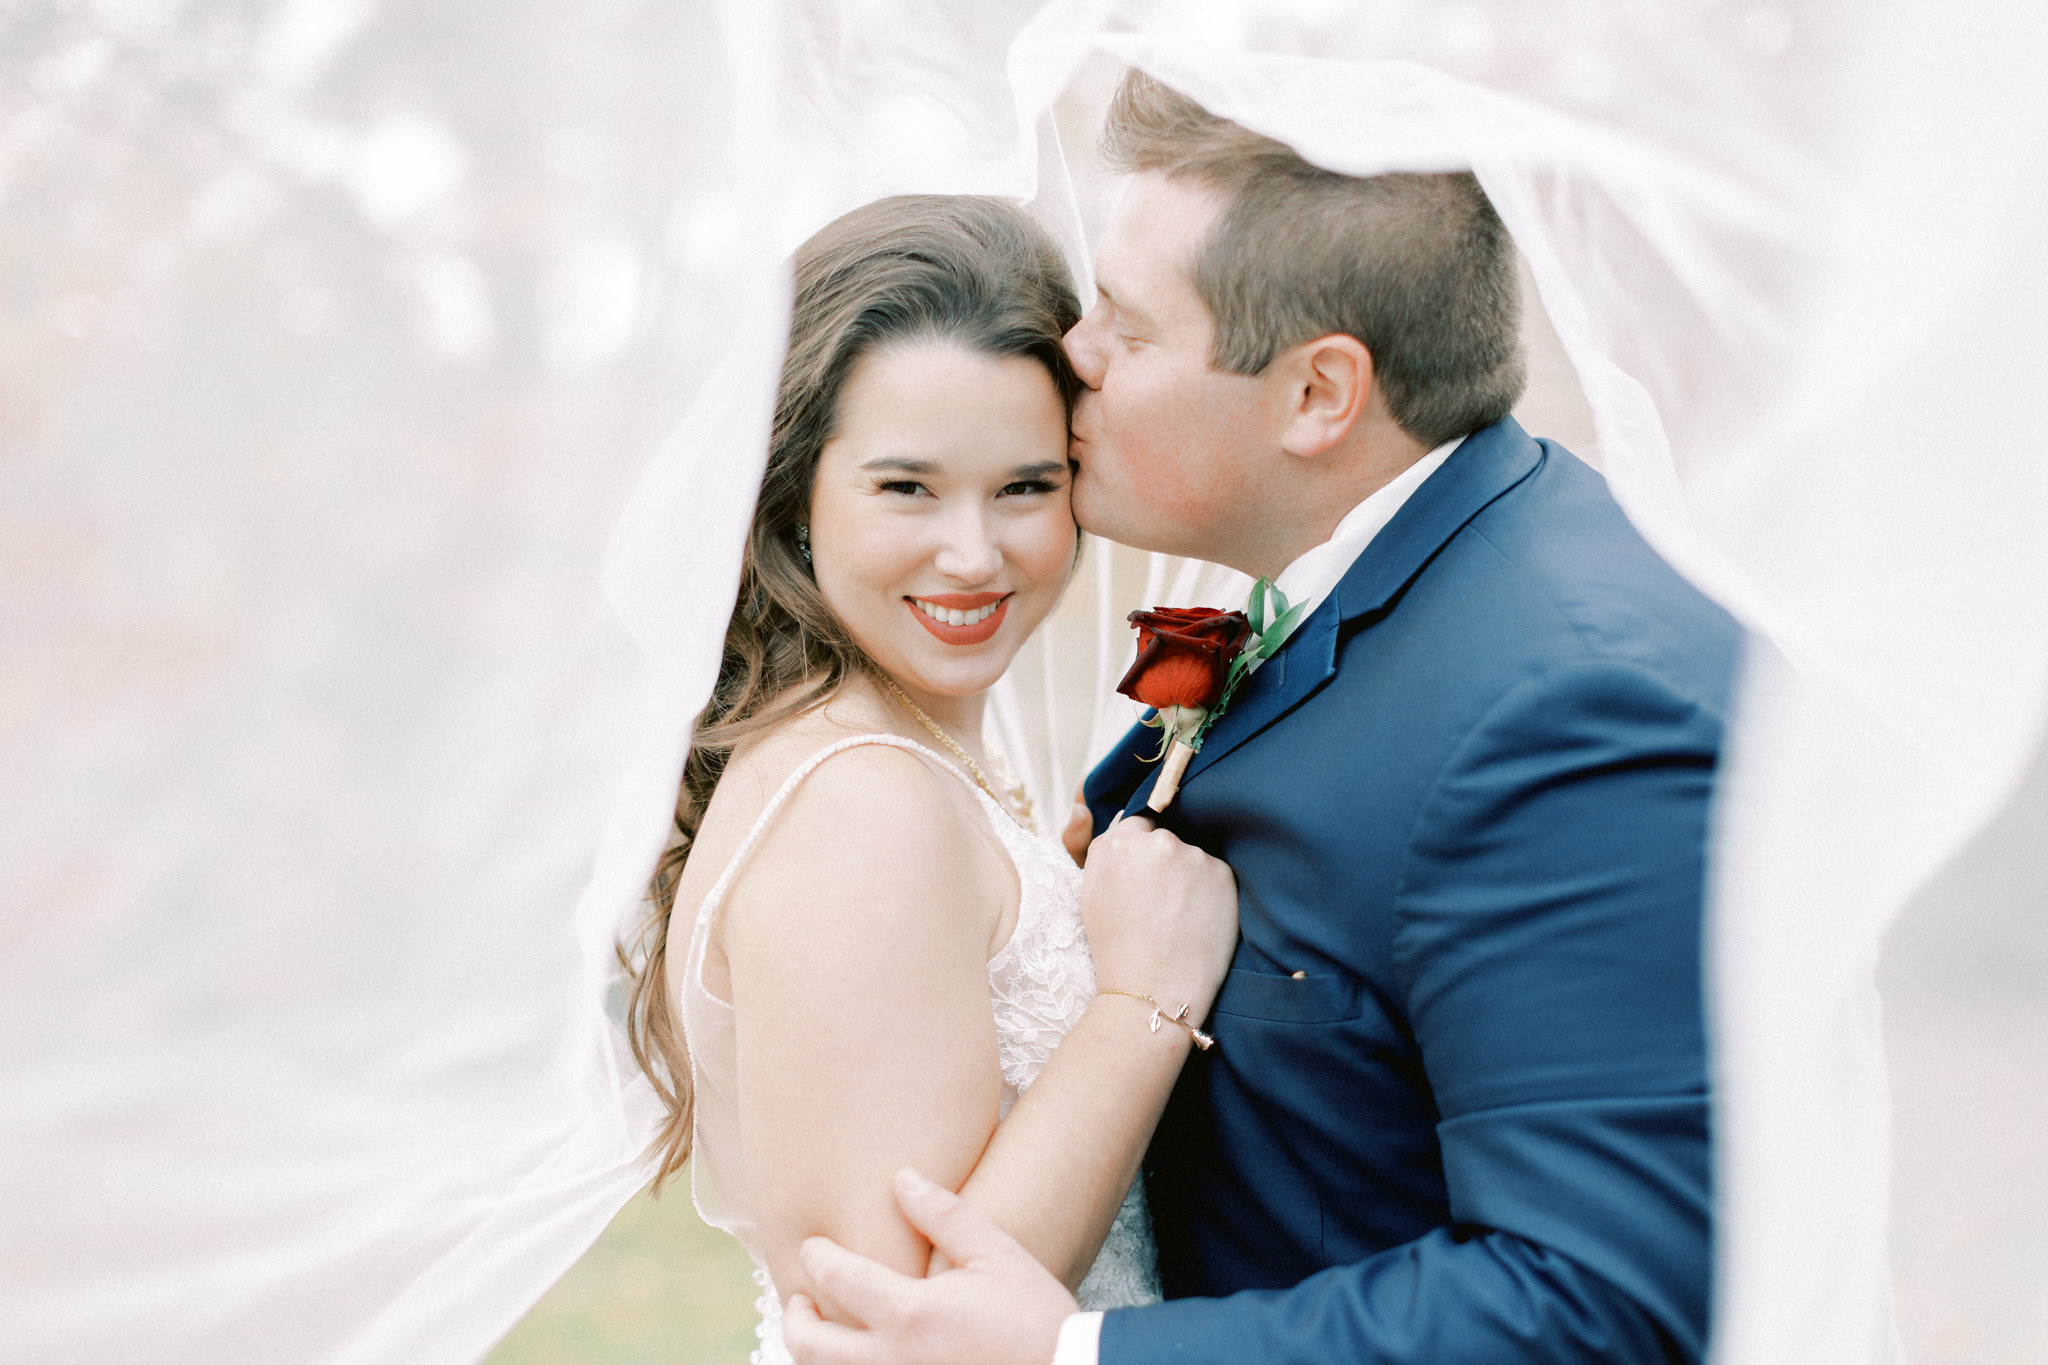 gable-hill-michigan-wedding-roths-hayley-moore-photography